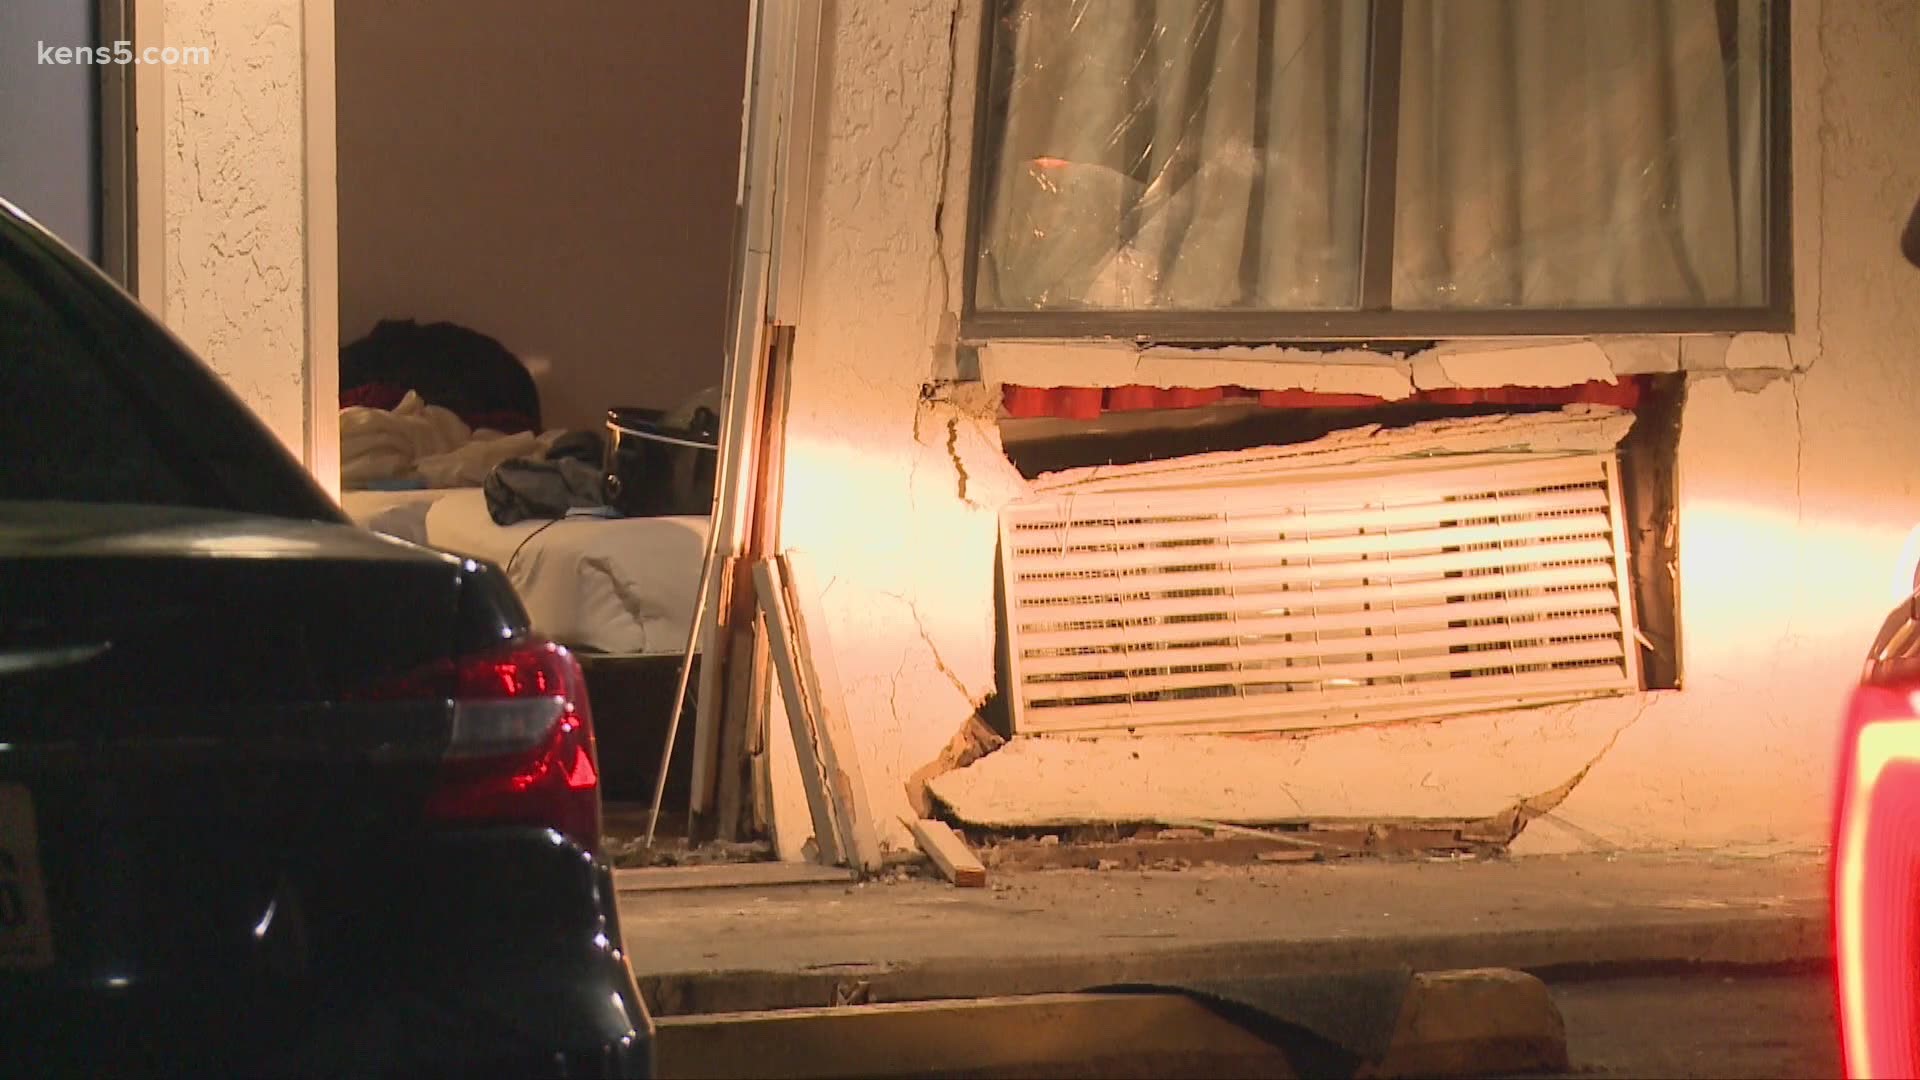 A man with several warrants is arrested after crashing into a Motel 6.